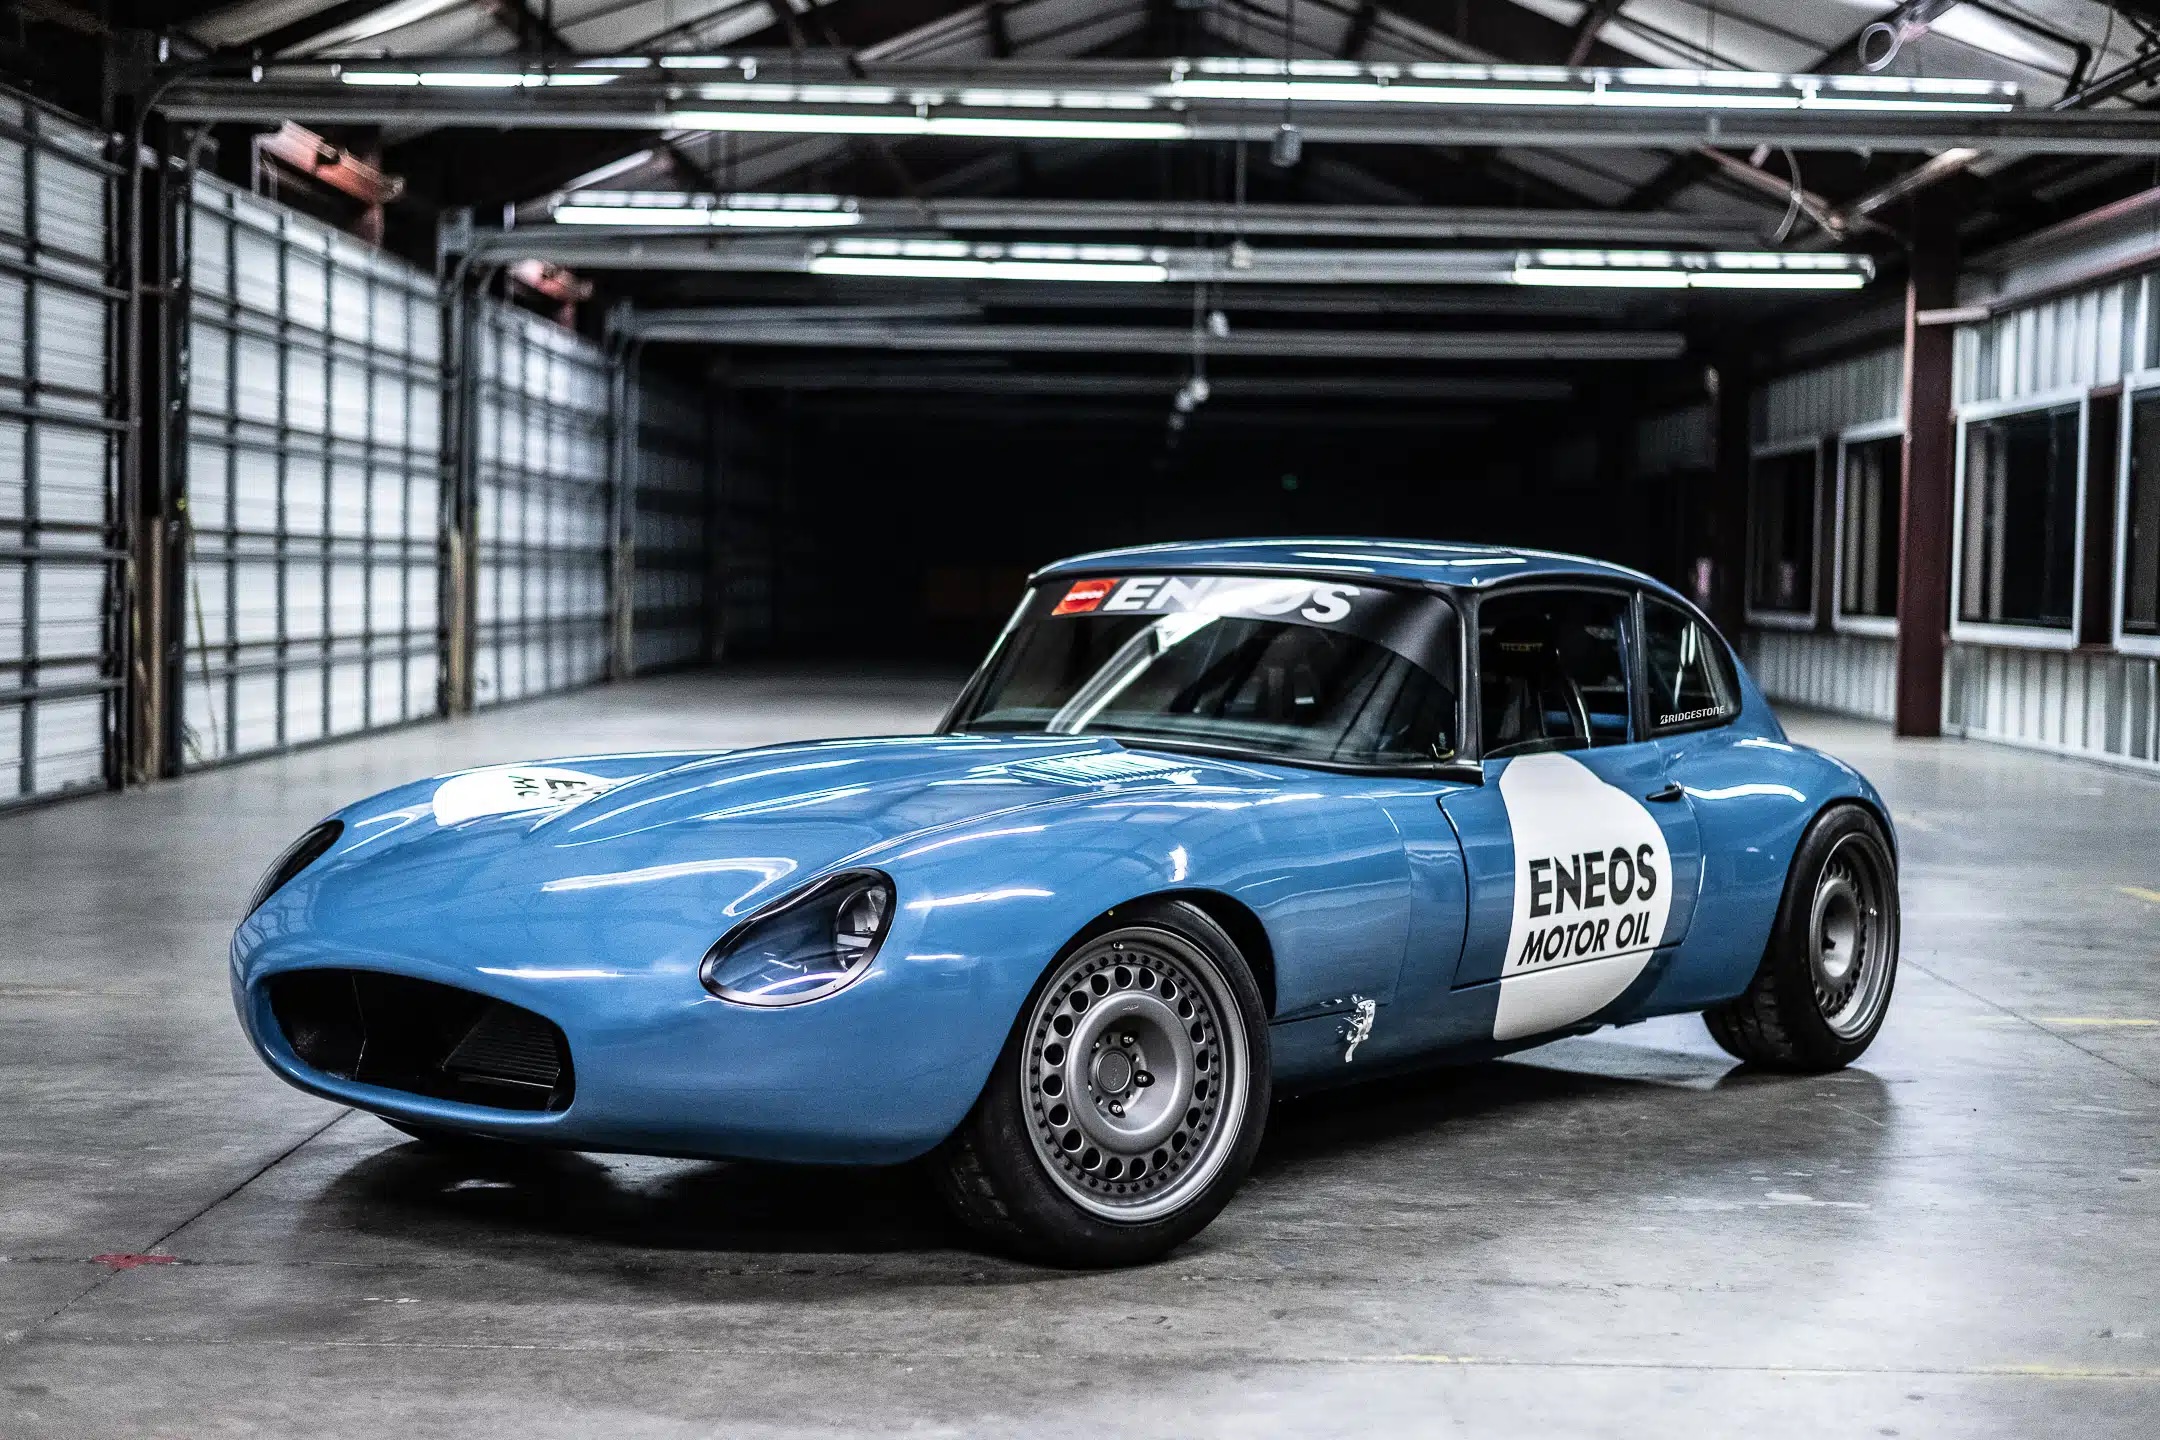 Dr. Frankenstein’s E-Type is a 750bhp, Toyota 2JZ-powered monster